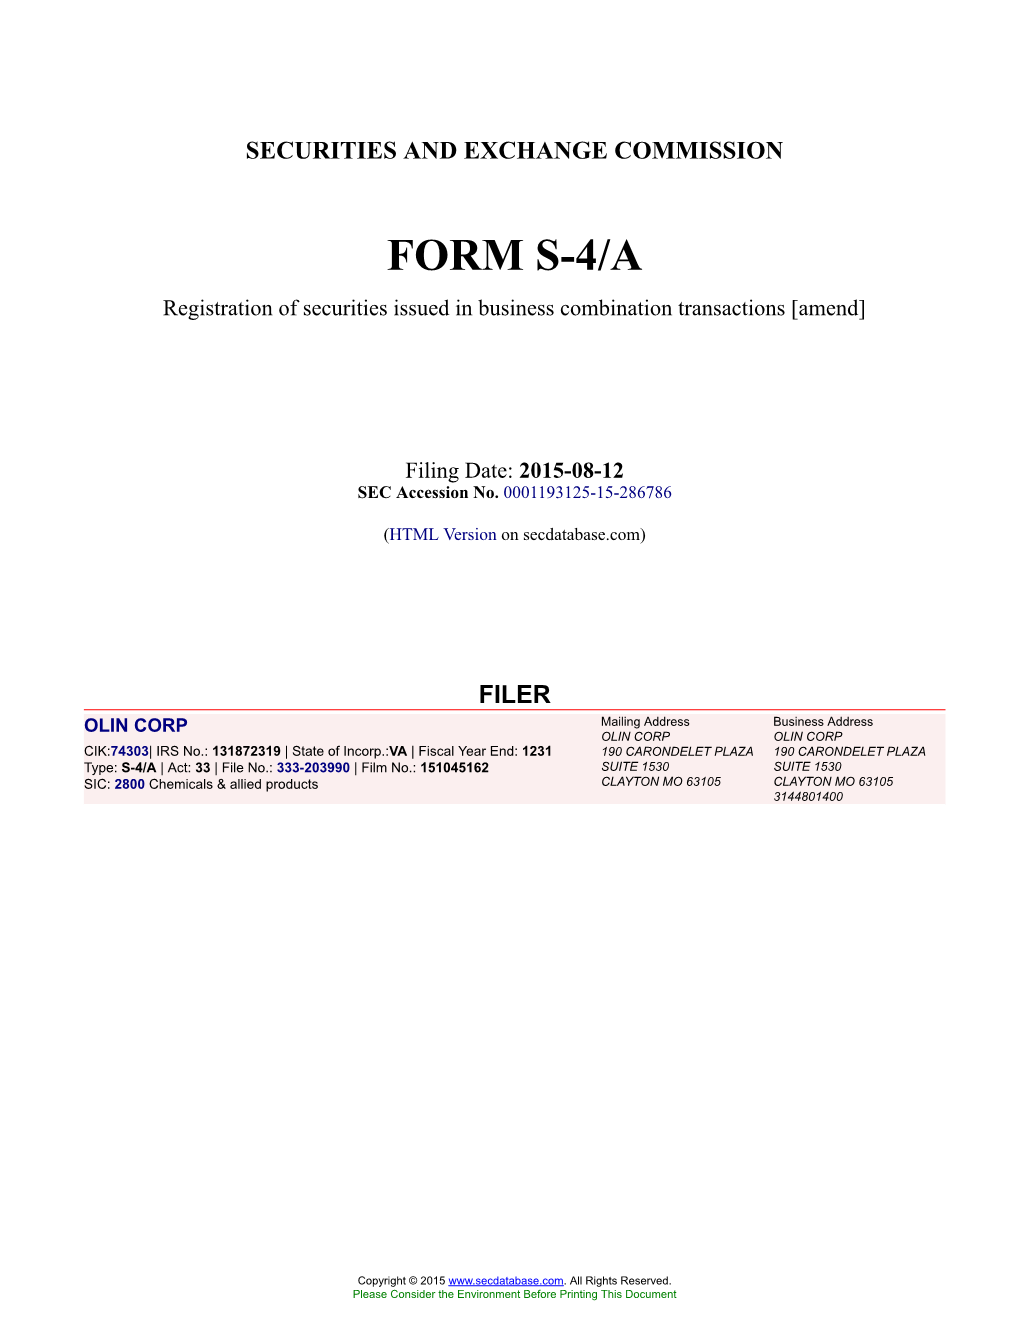 OLIN CORP Form S-4/A Filed 2015-08-12